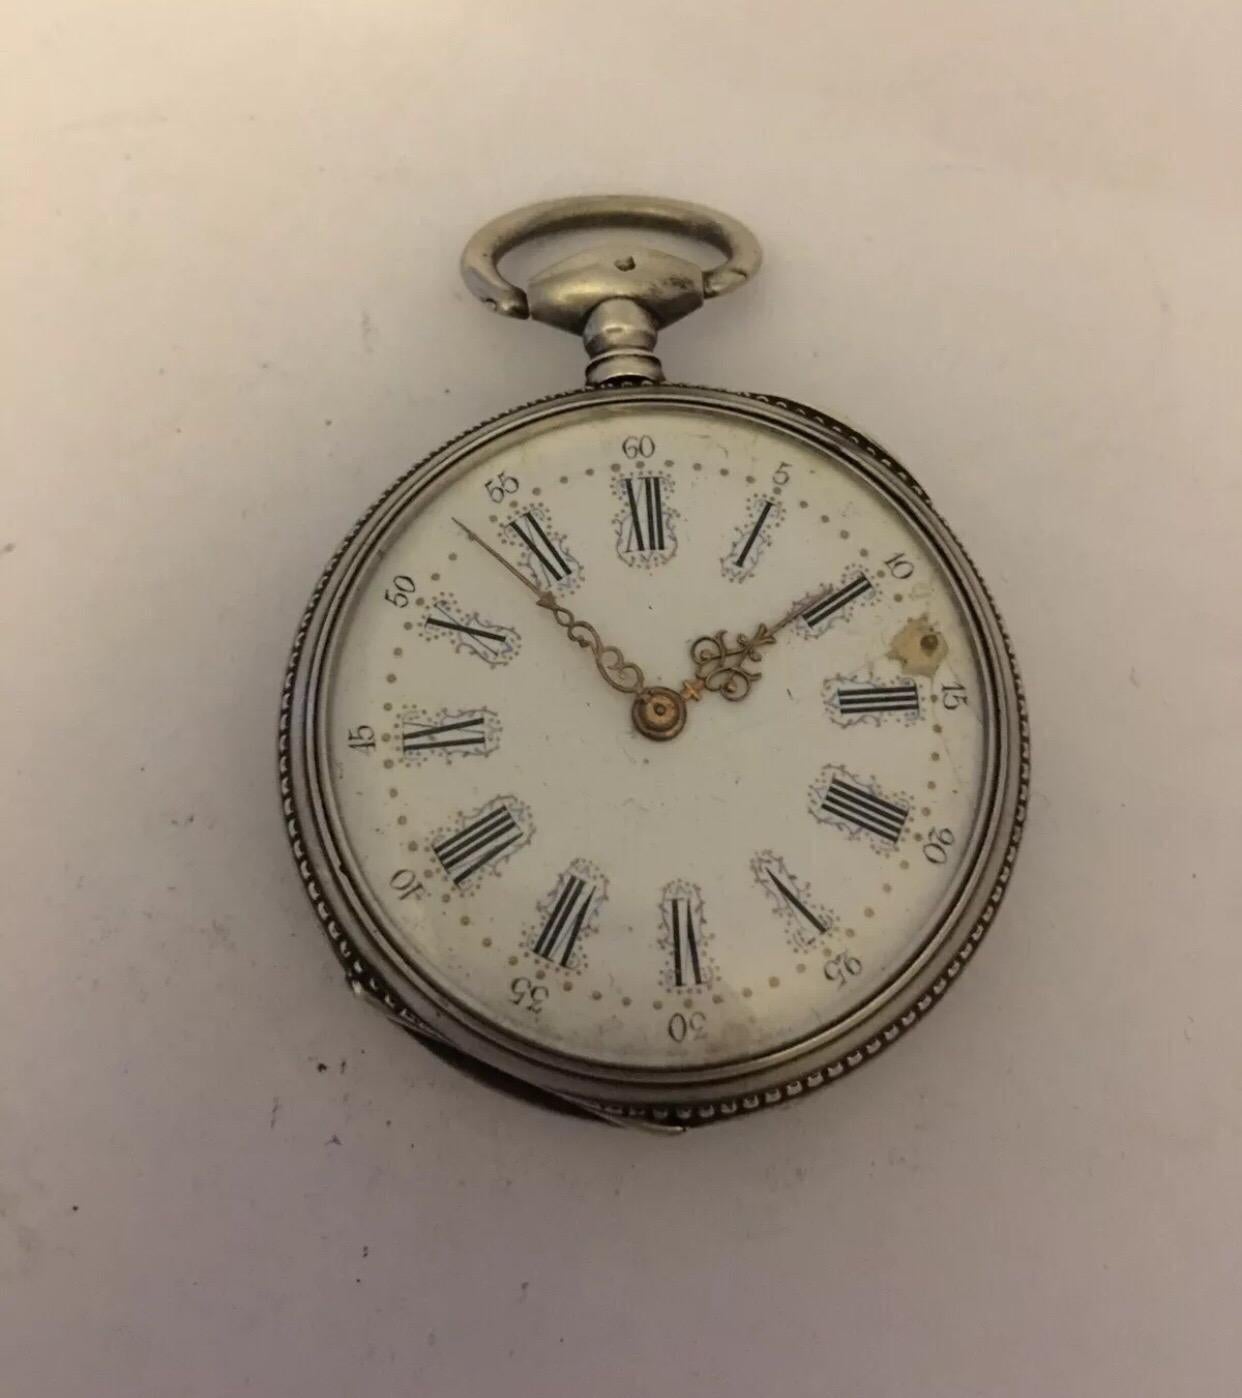 
Antique Silver Key-wind Pocket Watch.

This watch is working and ticking well. Visible chipped on the enamel dial. it comes with a key.